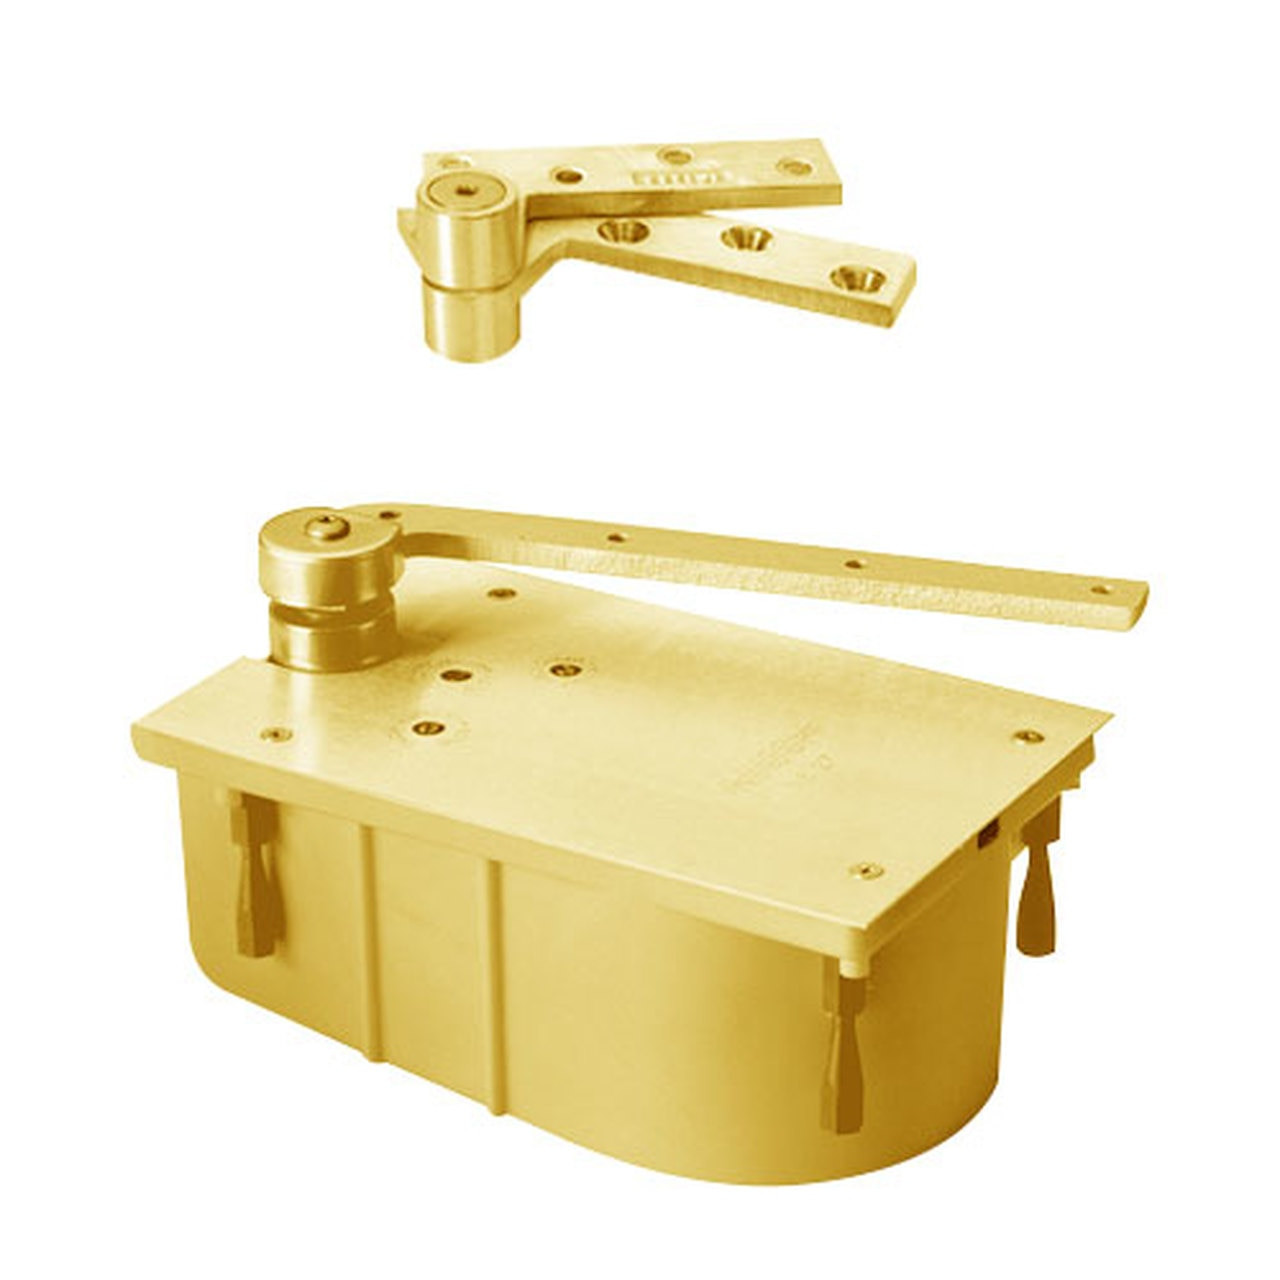 F127-105N-LTP-RH-605 Rixson 27 Series Fire Rated Heavy Duty 3/4" Offset Hung Floor Closer in Bright Brass Finish